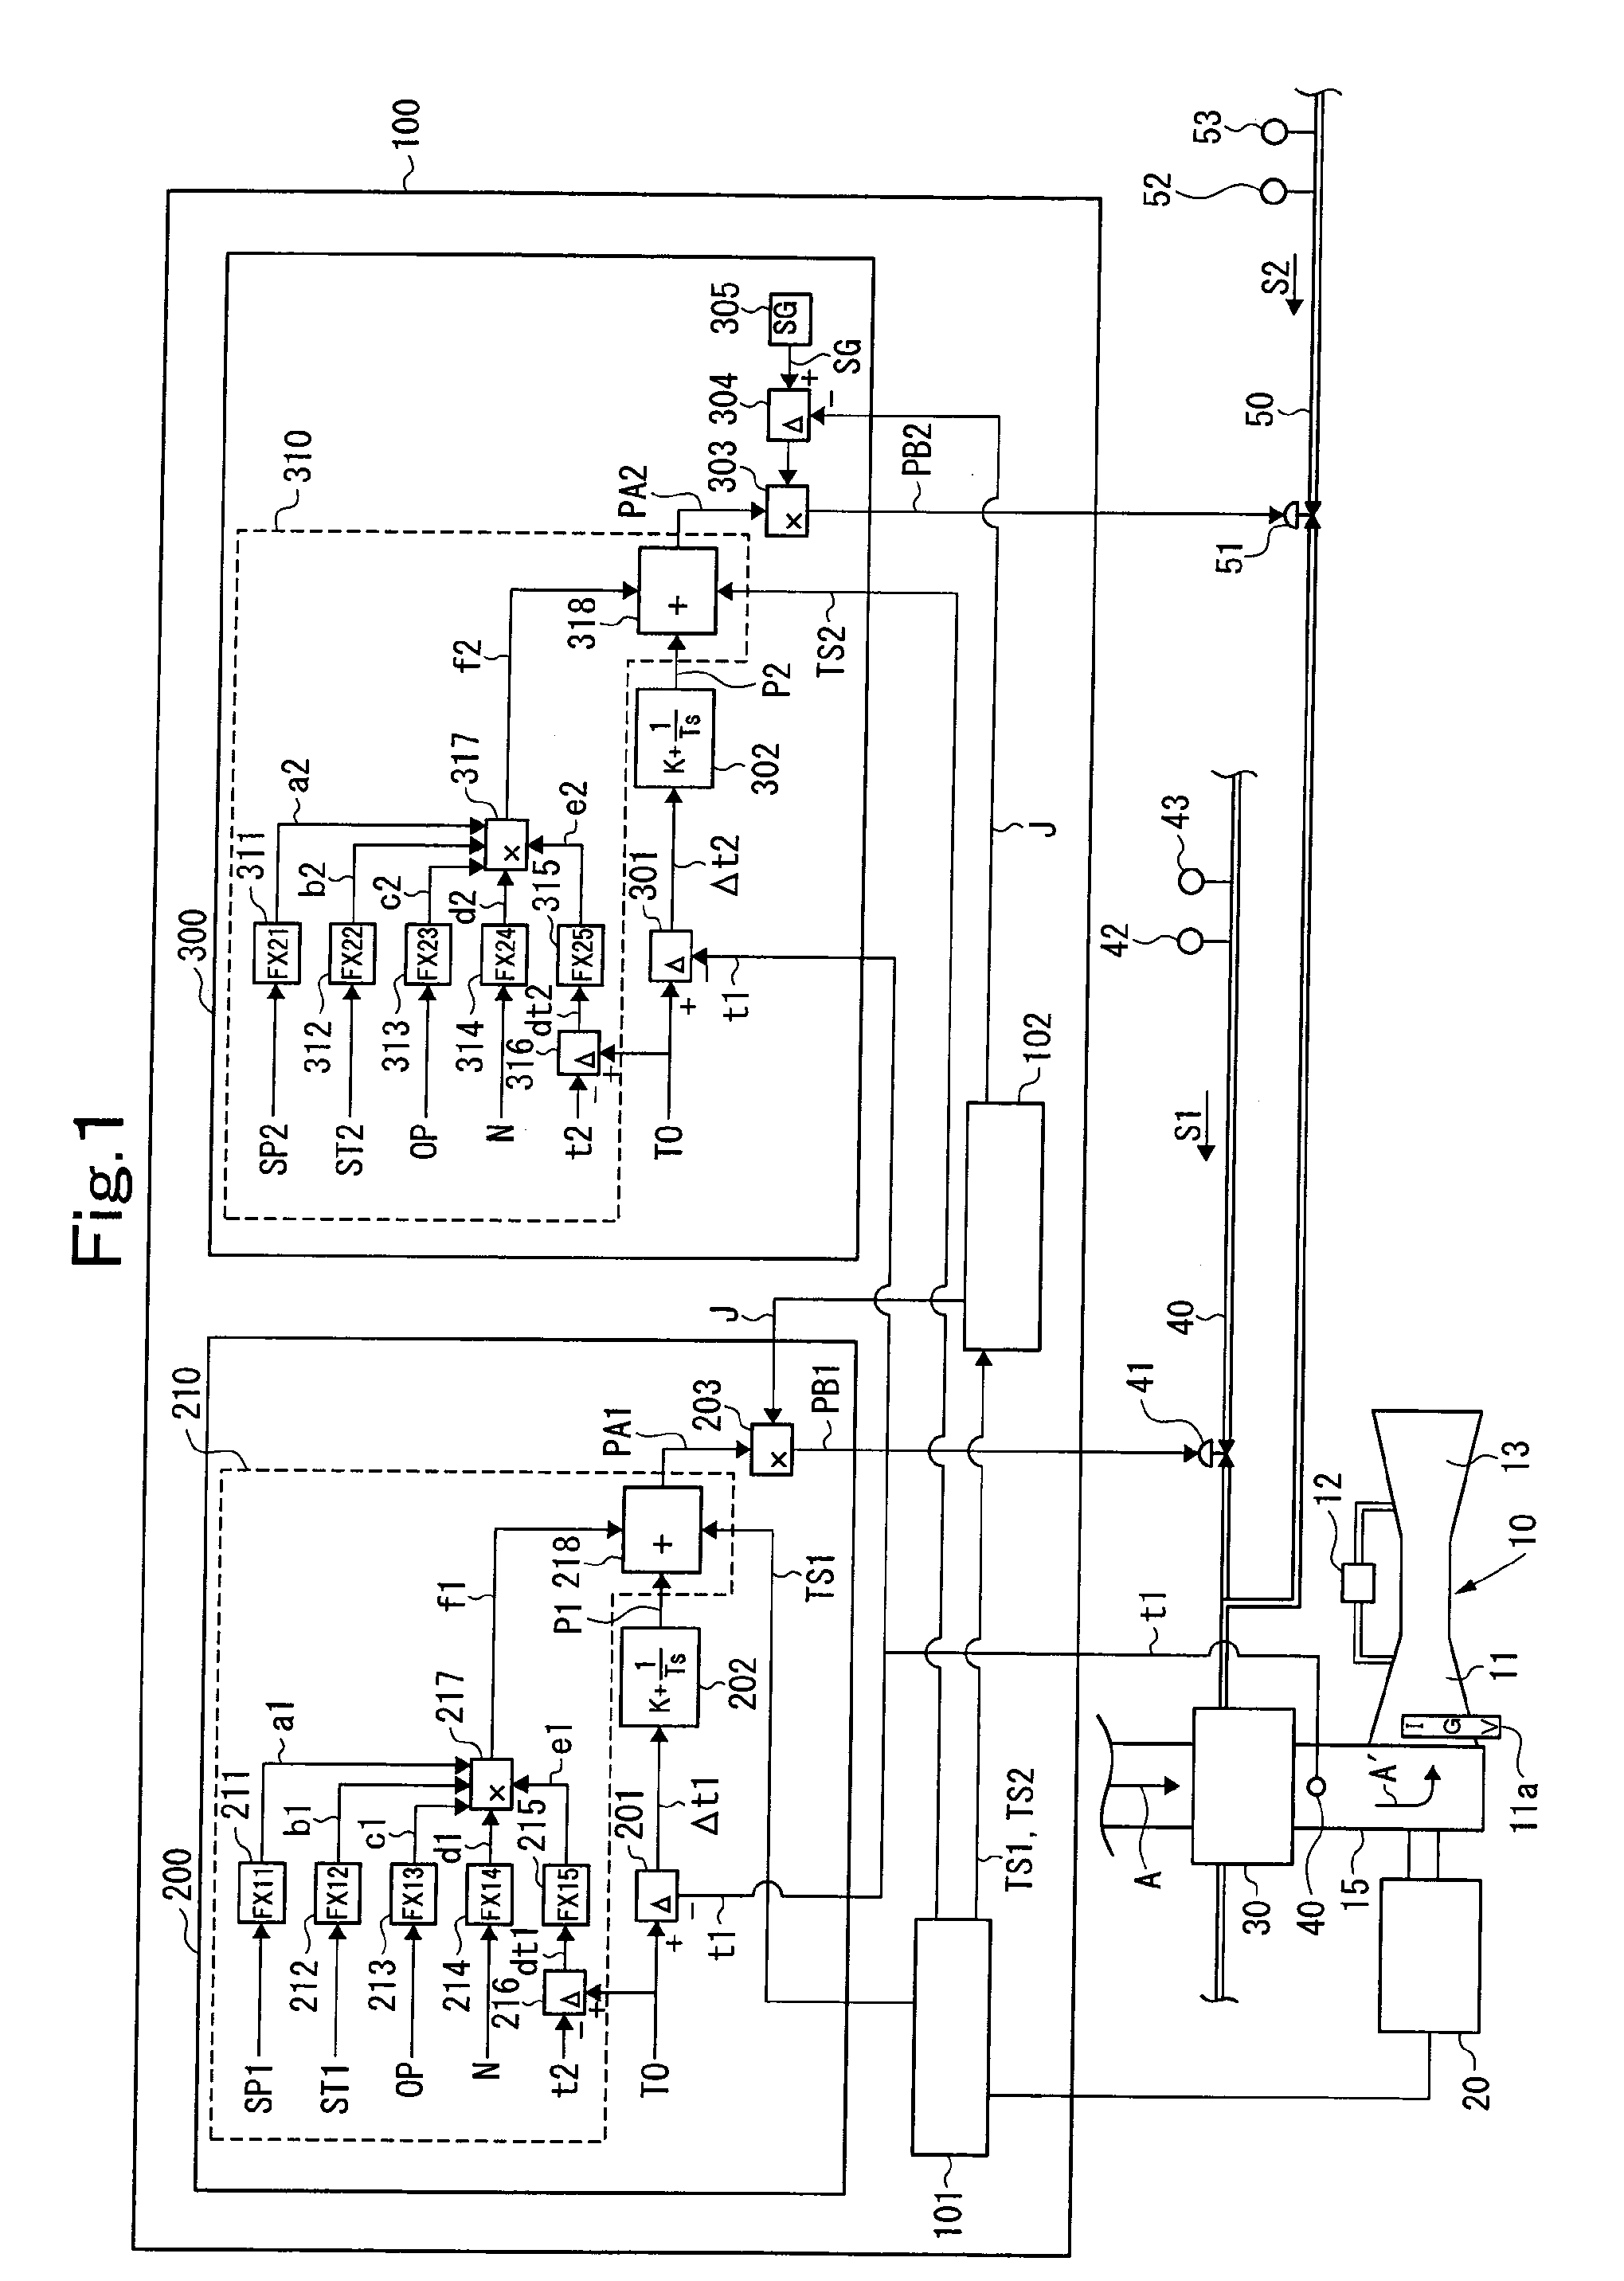 Apparatus for controlling intake air heating of gas turbine